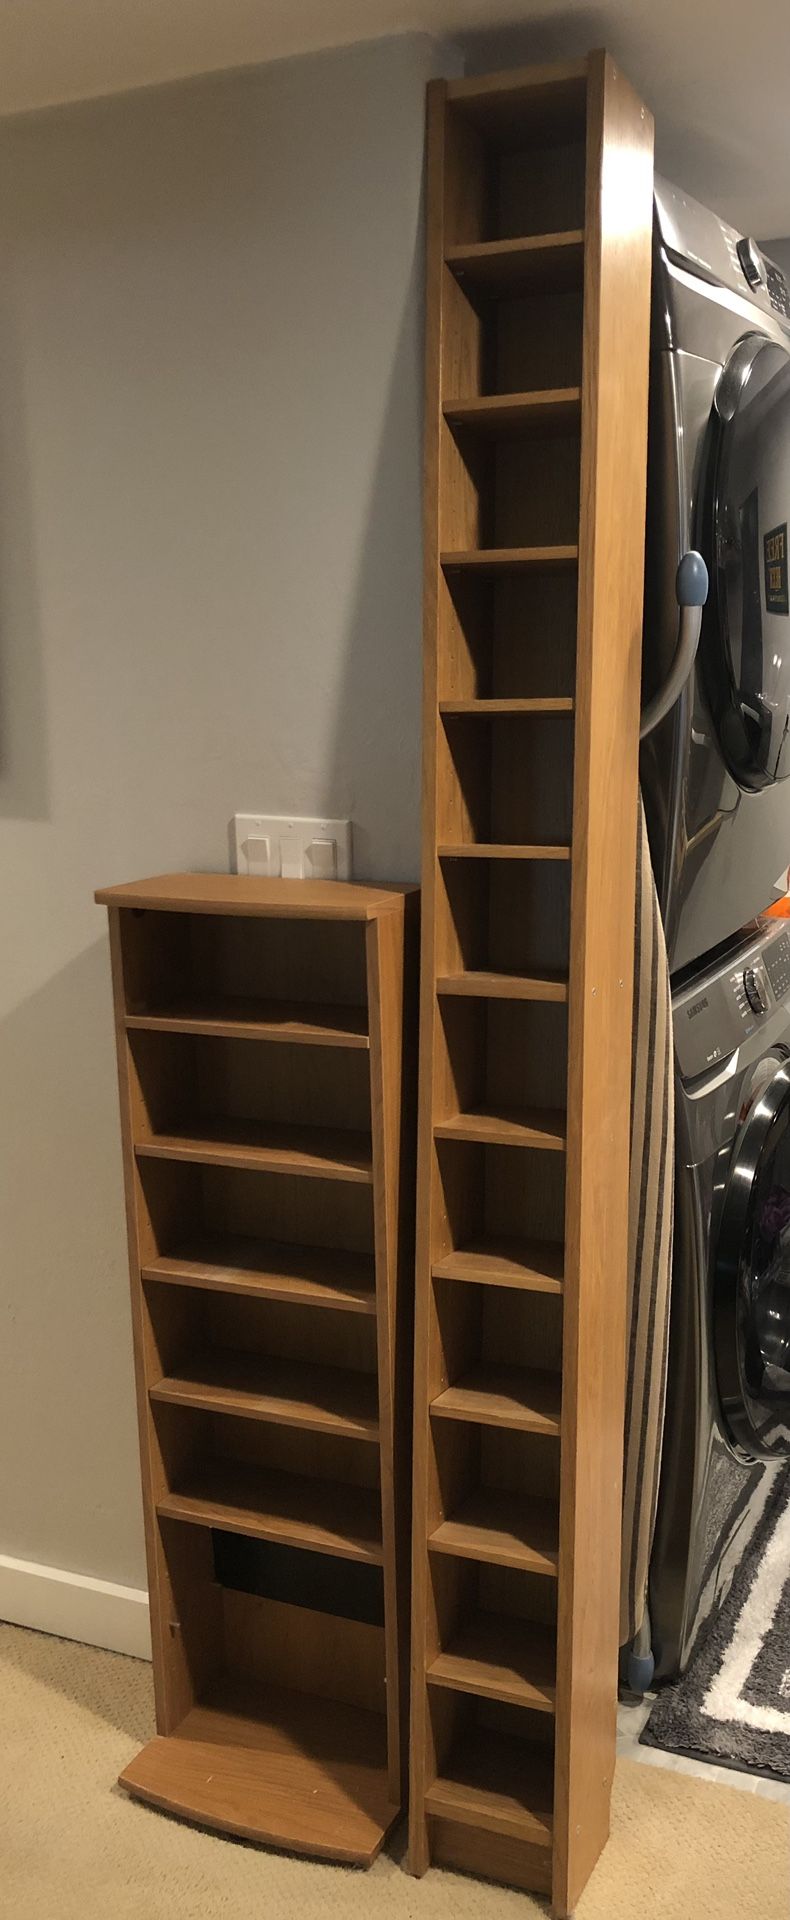 Set of Used CD Tower Storage Racks: Large and Small